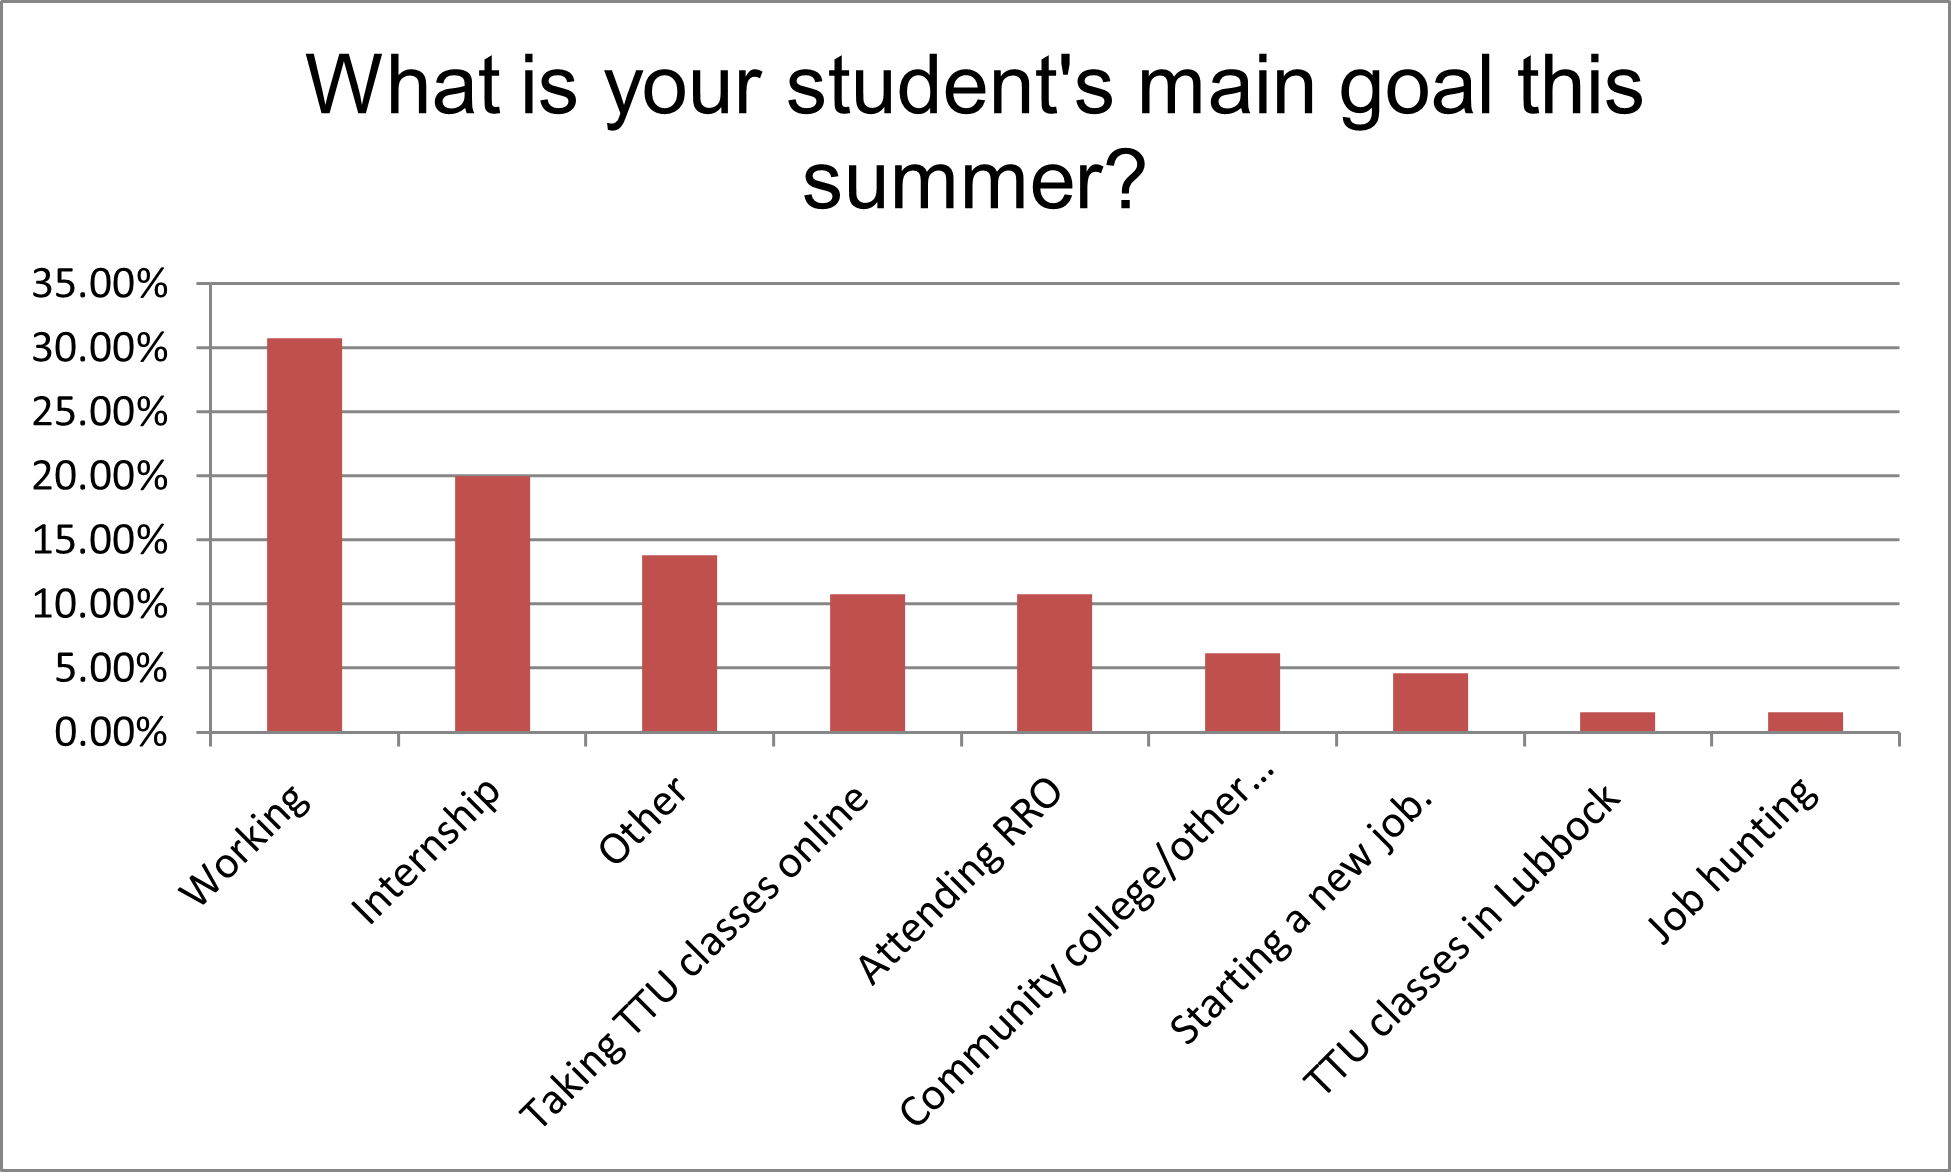 Chart showing poll results: "What is you student's main goal this summer?" Top answers are working, internship, other